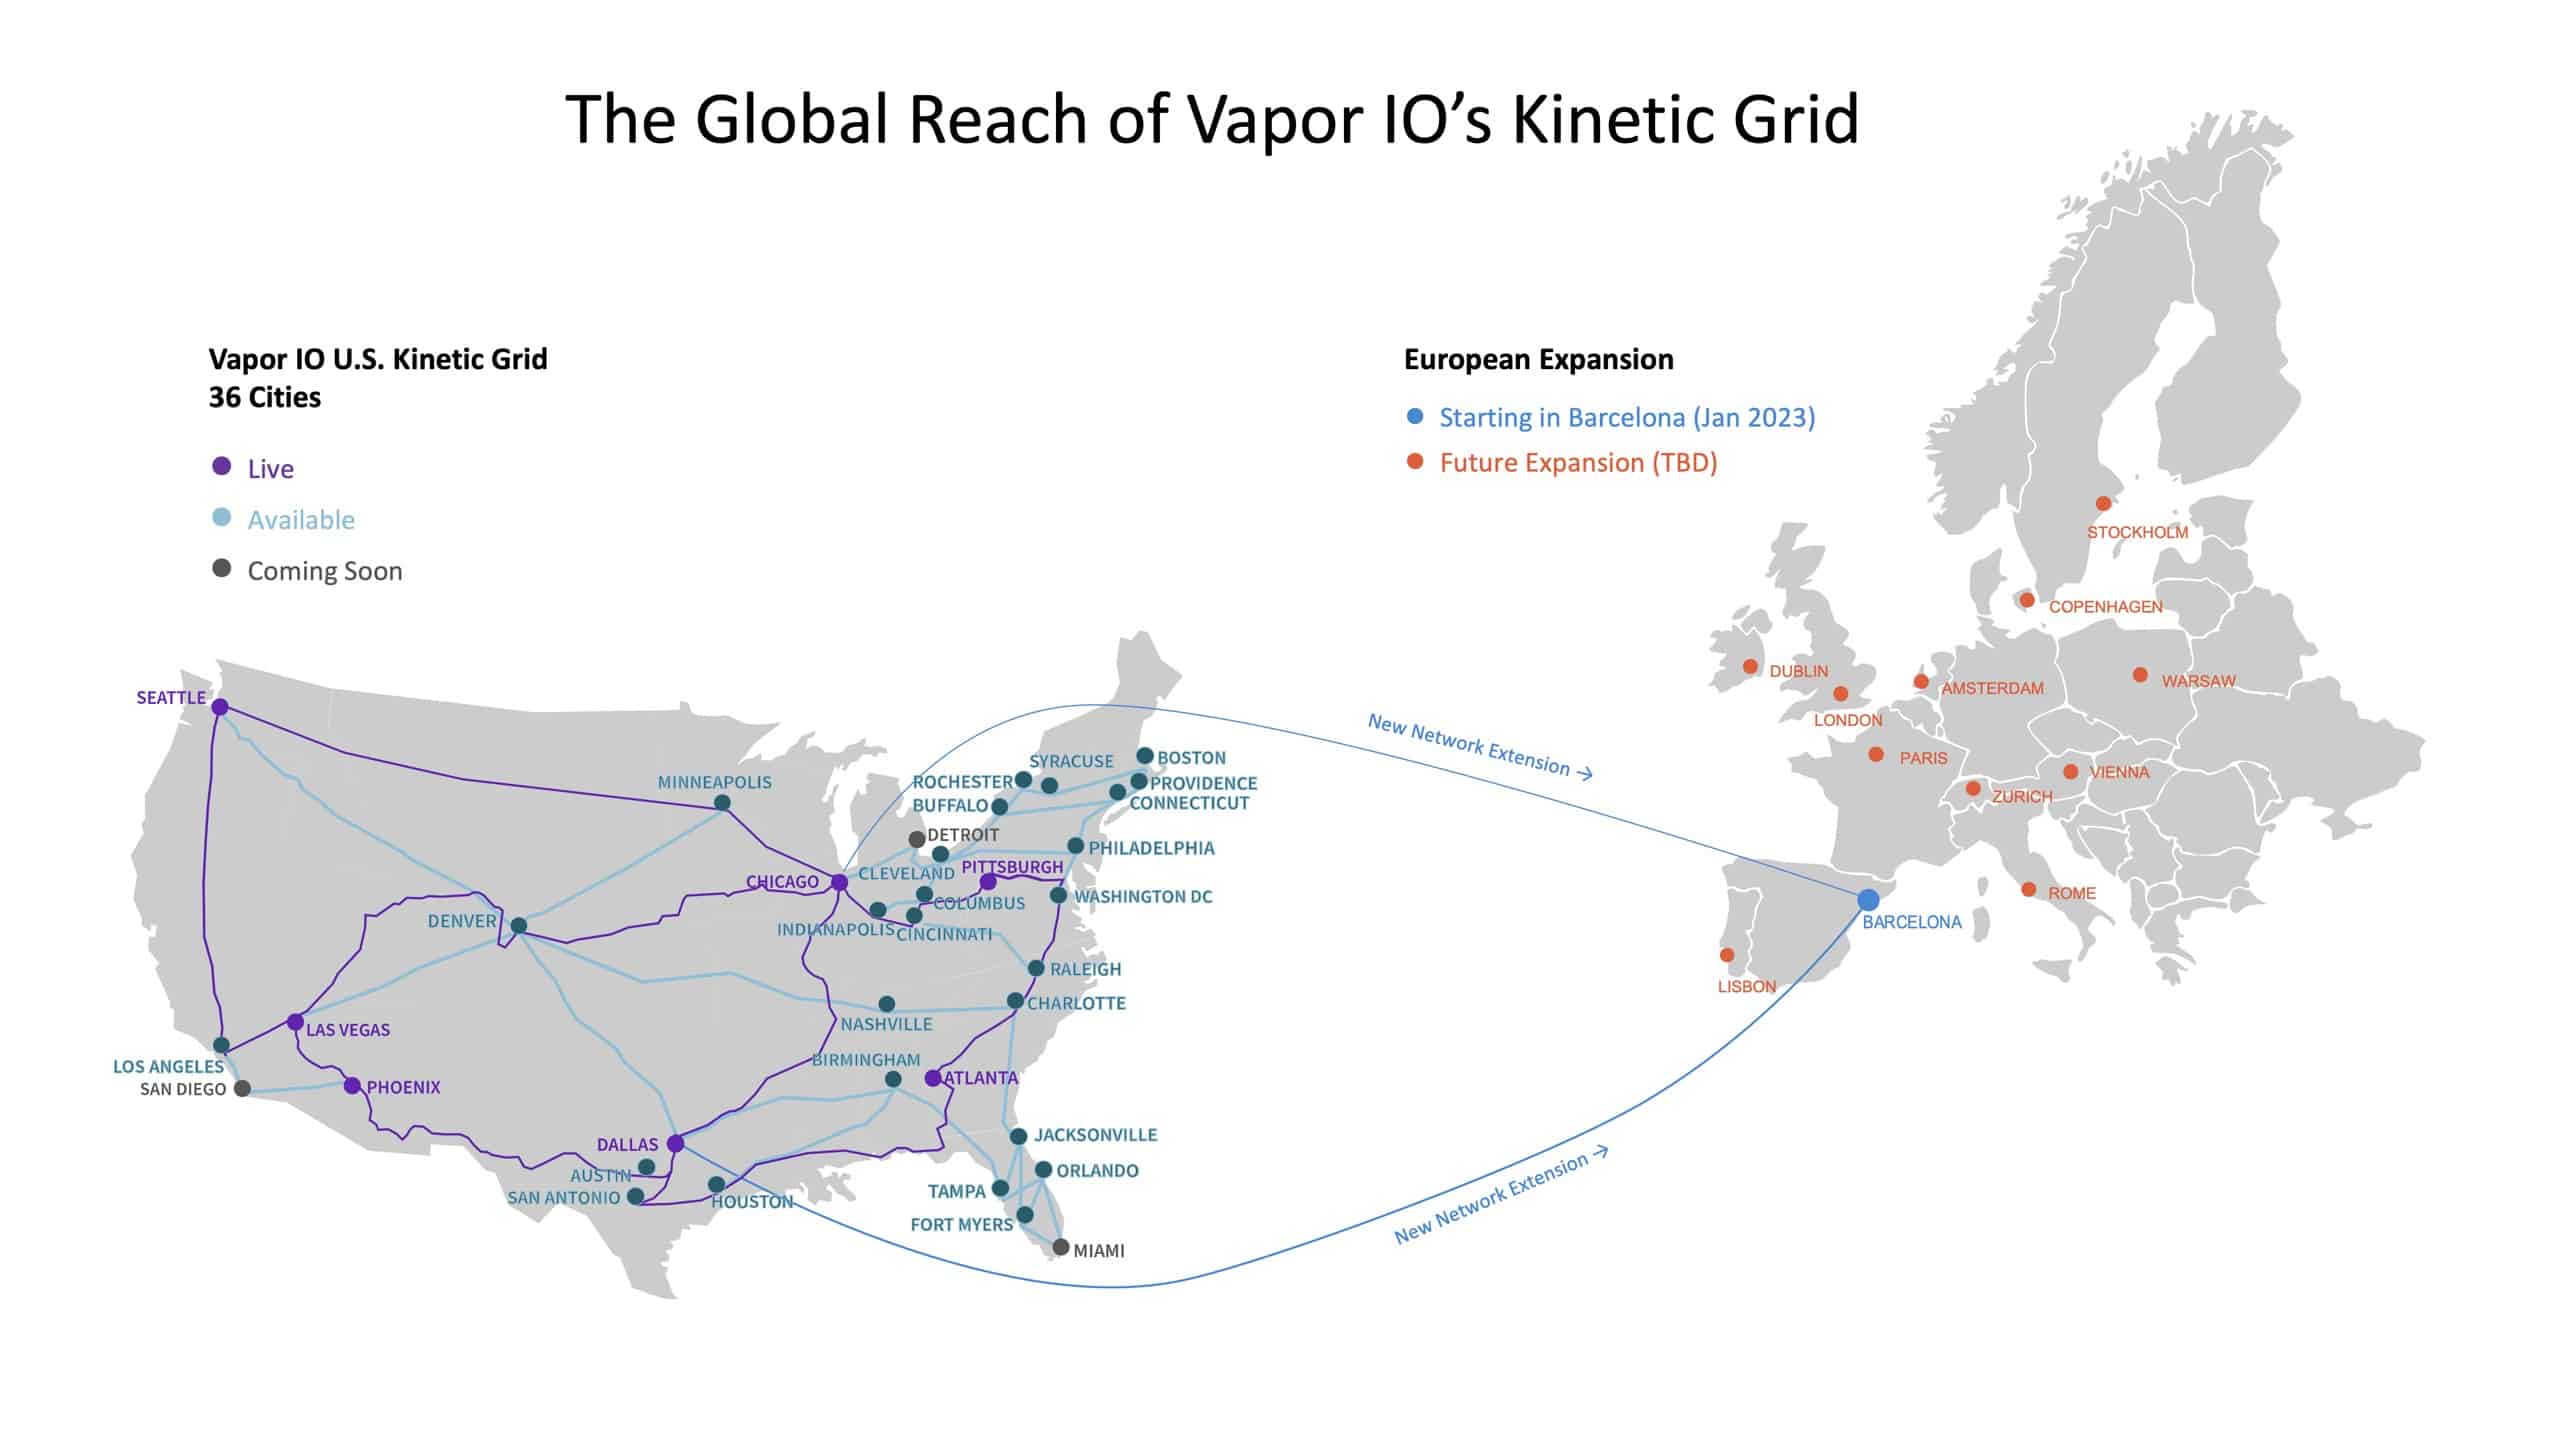 A map of Vapor IO's Kinetic Grid in the US showing its Jan 2023 expansion to Europe, starting in Barcelona.